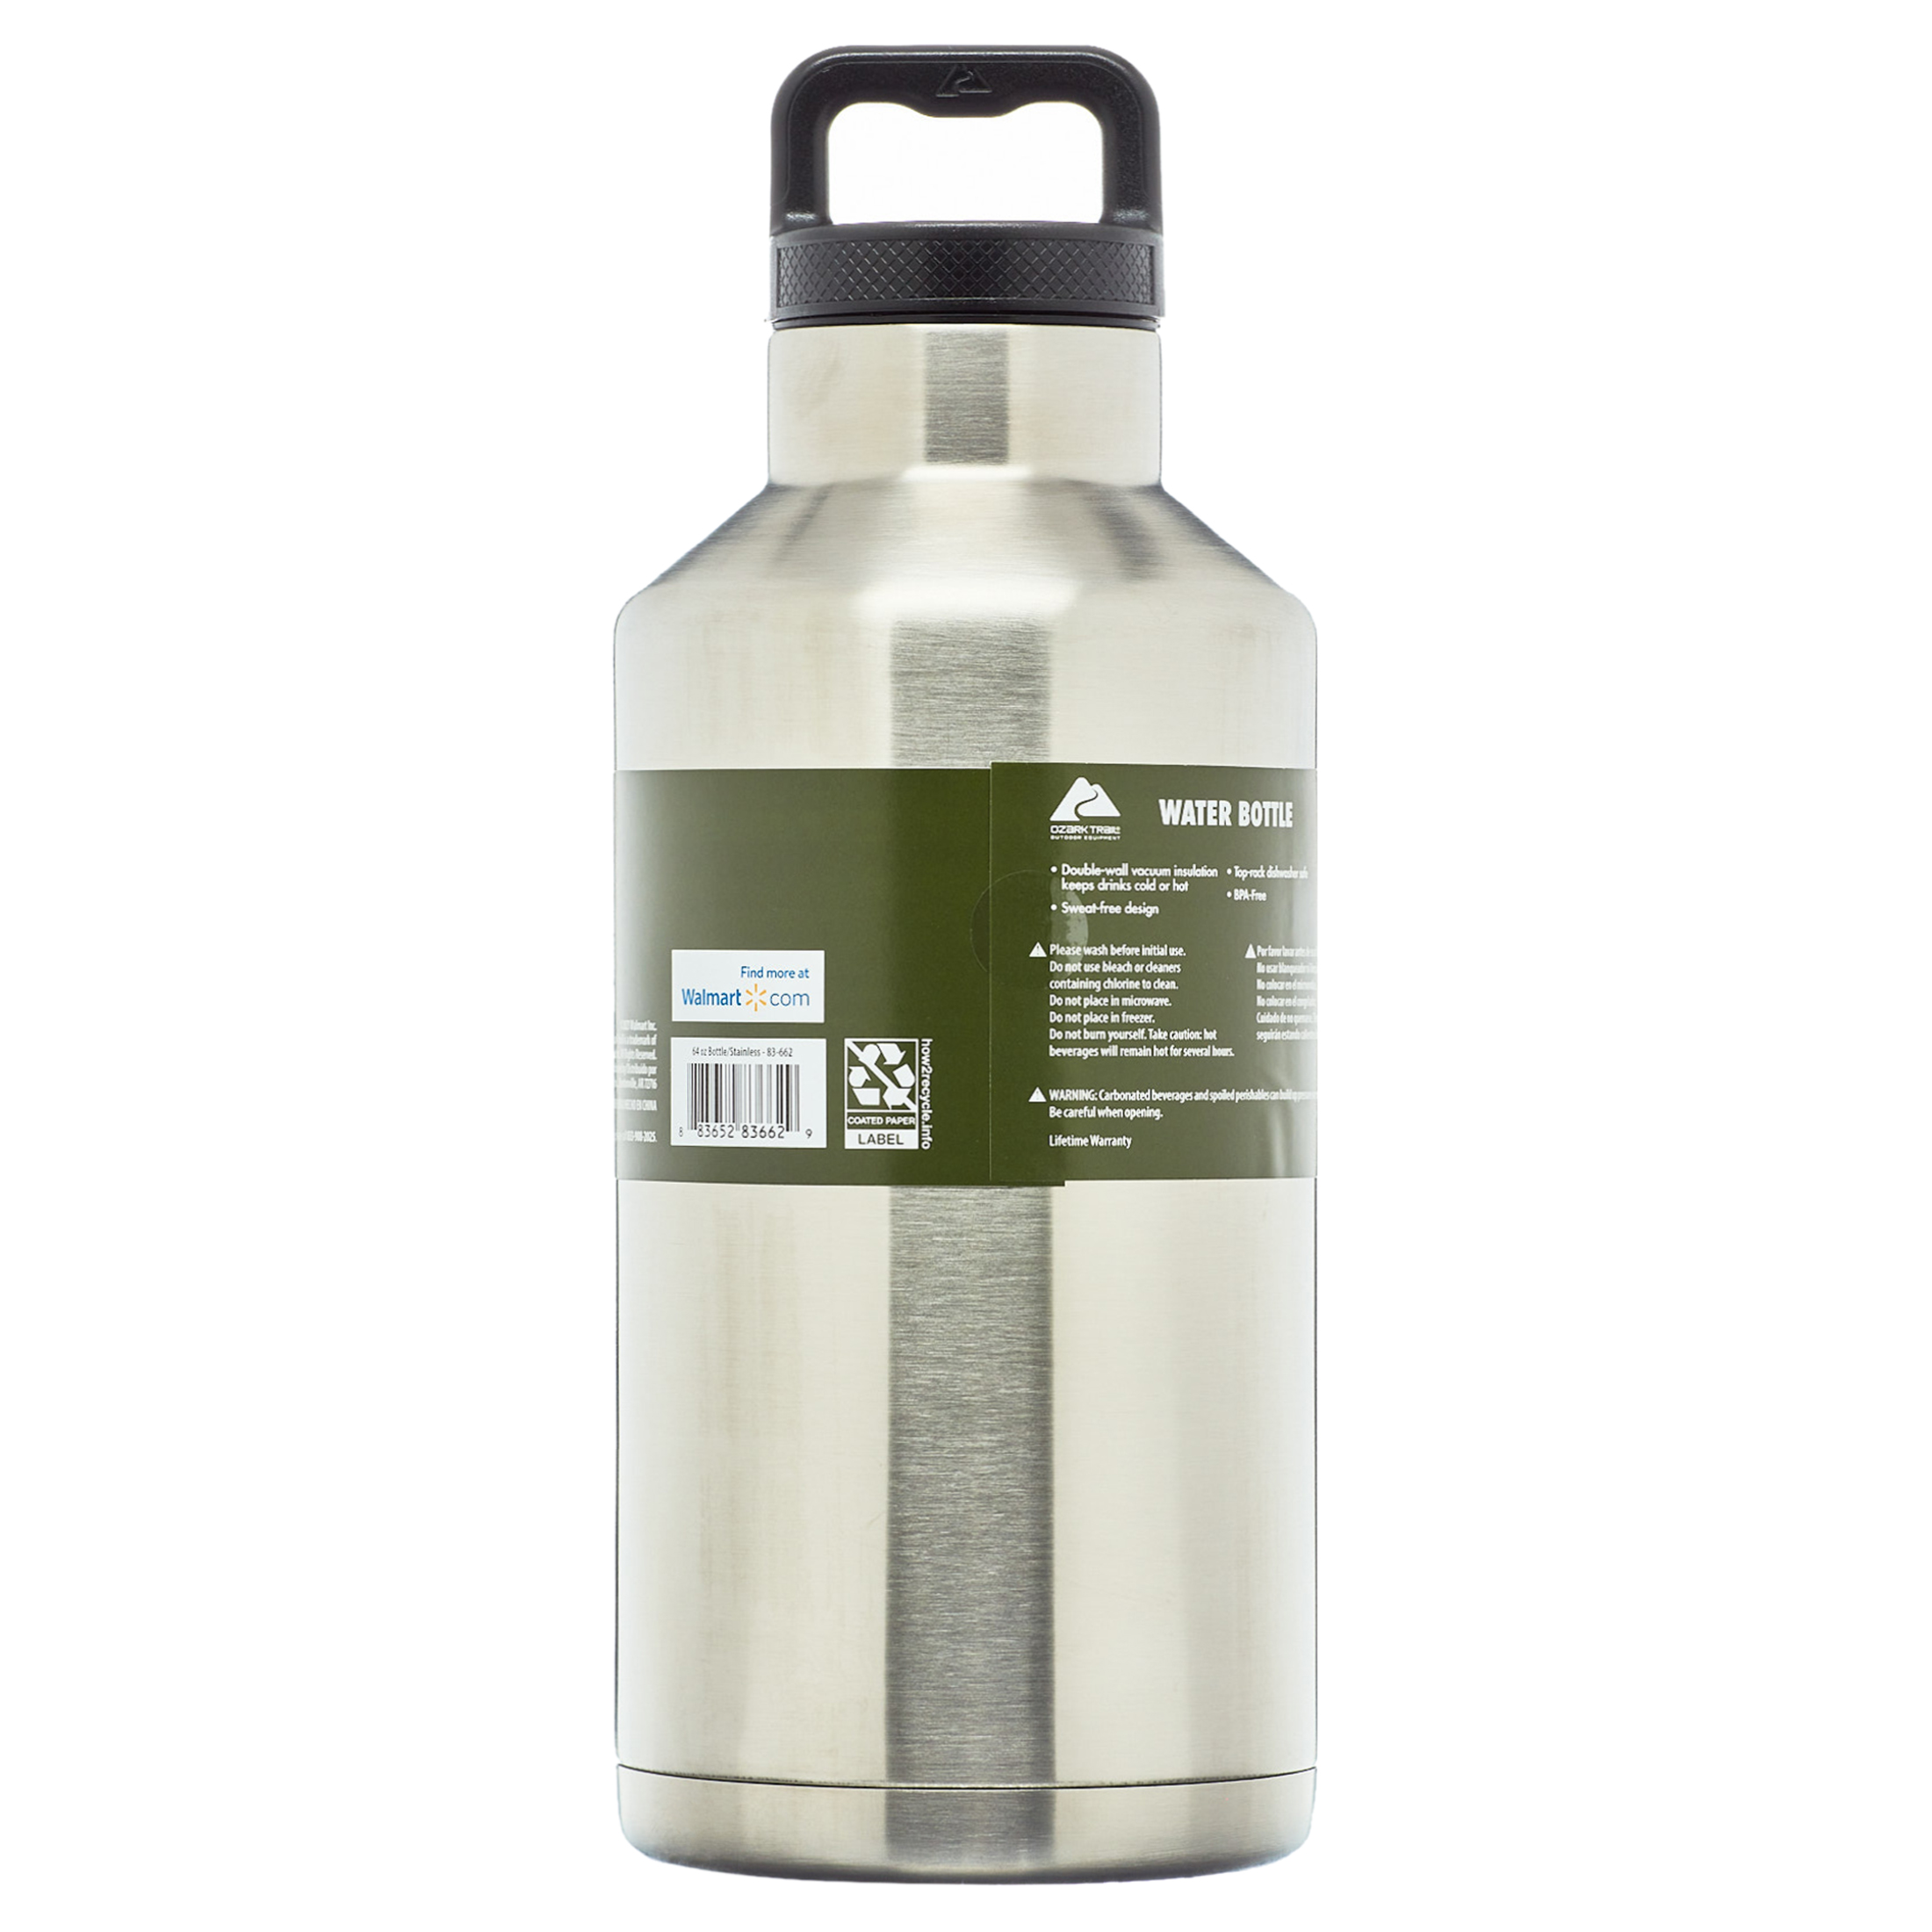 Ozark Trail Double Wall Stainless Steel Water Bottle - image 5 of 7